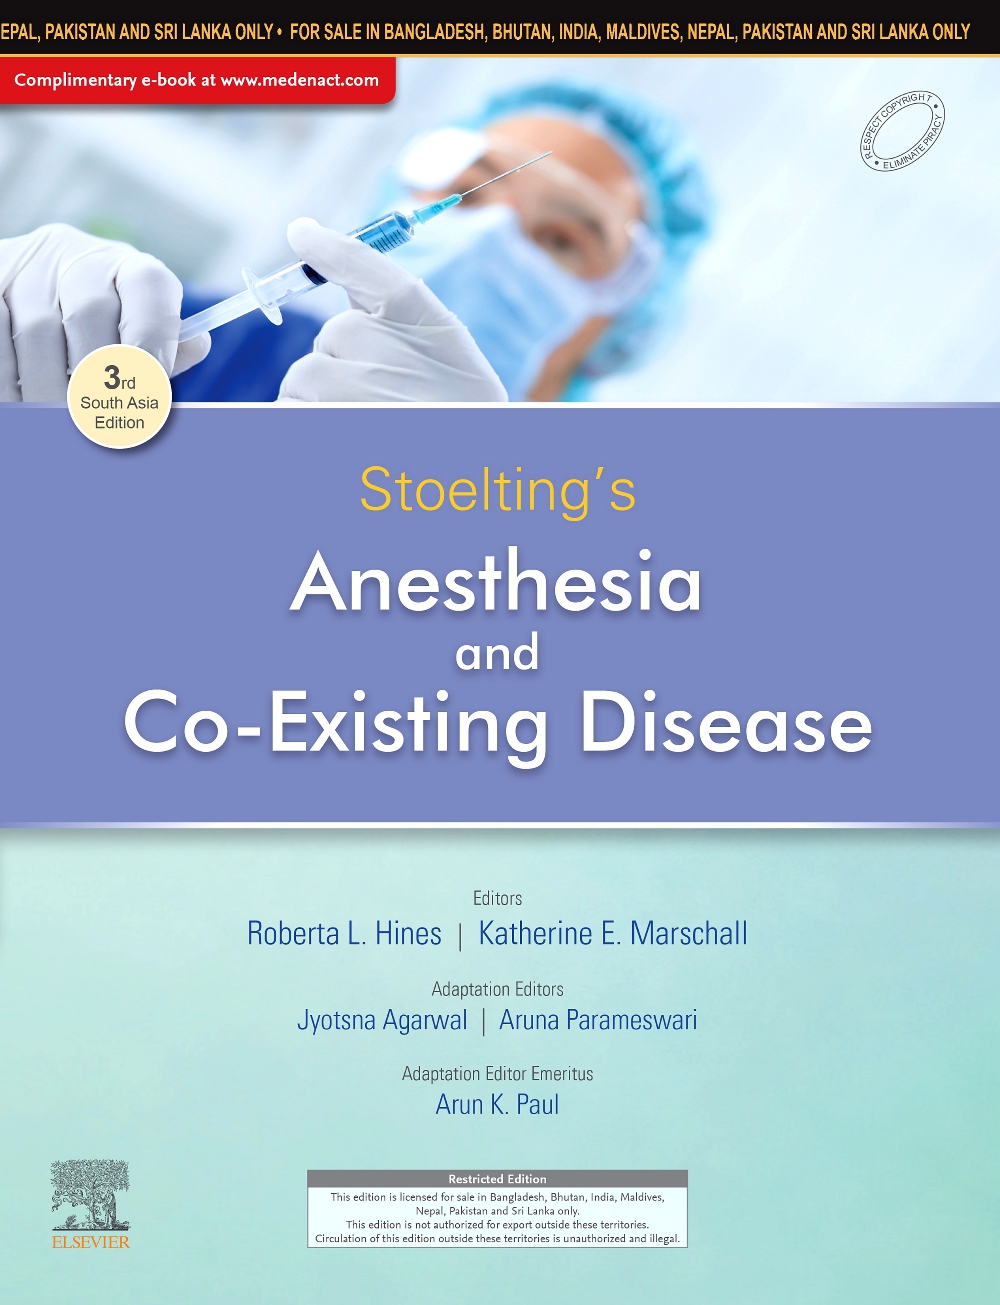 Stoelting'S Anesthesia & Co-Existing Disease, Third South Asia Edition